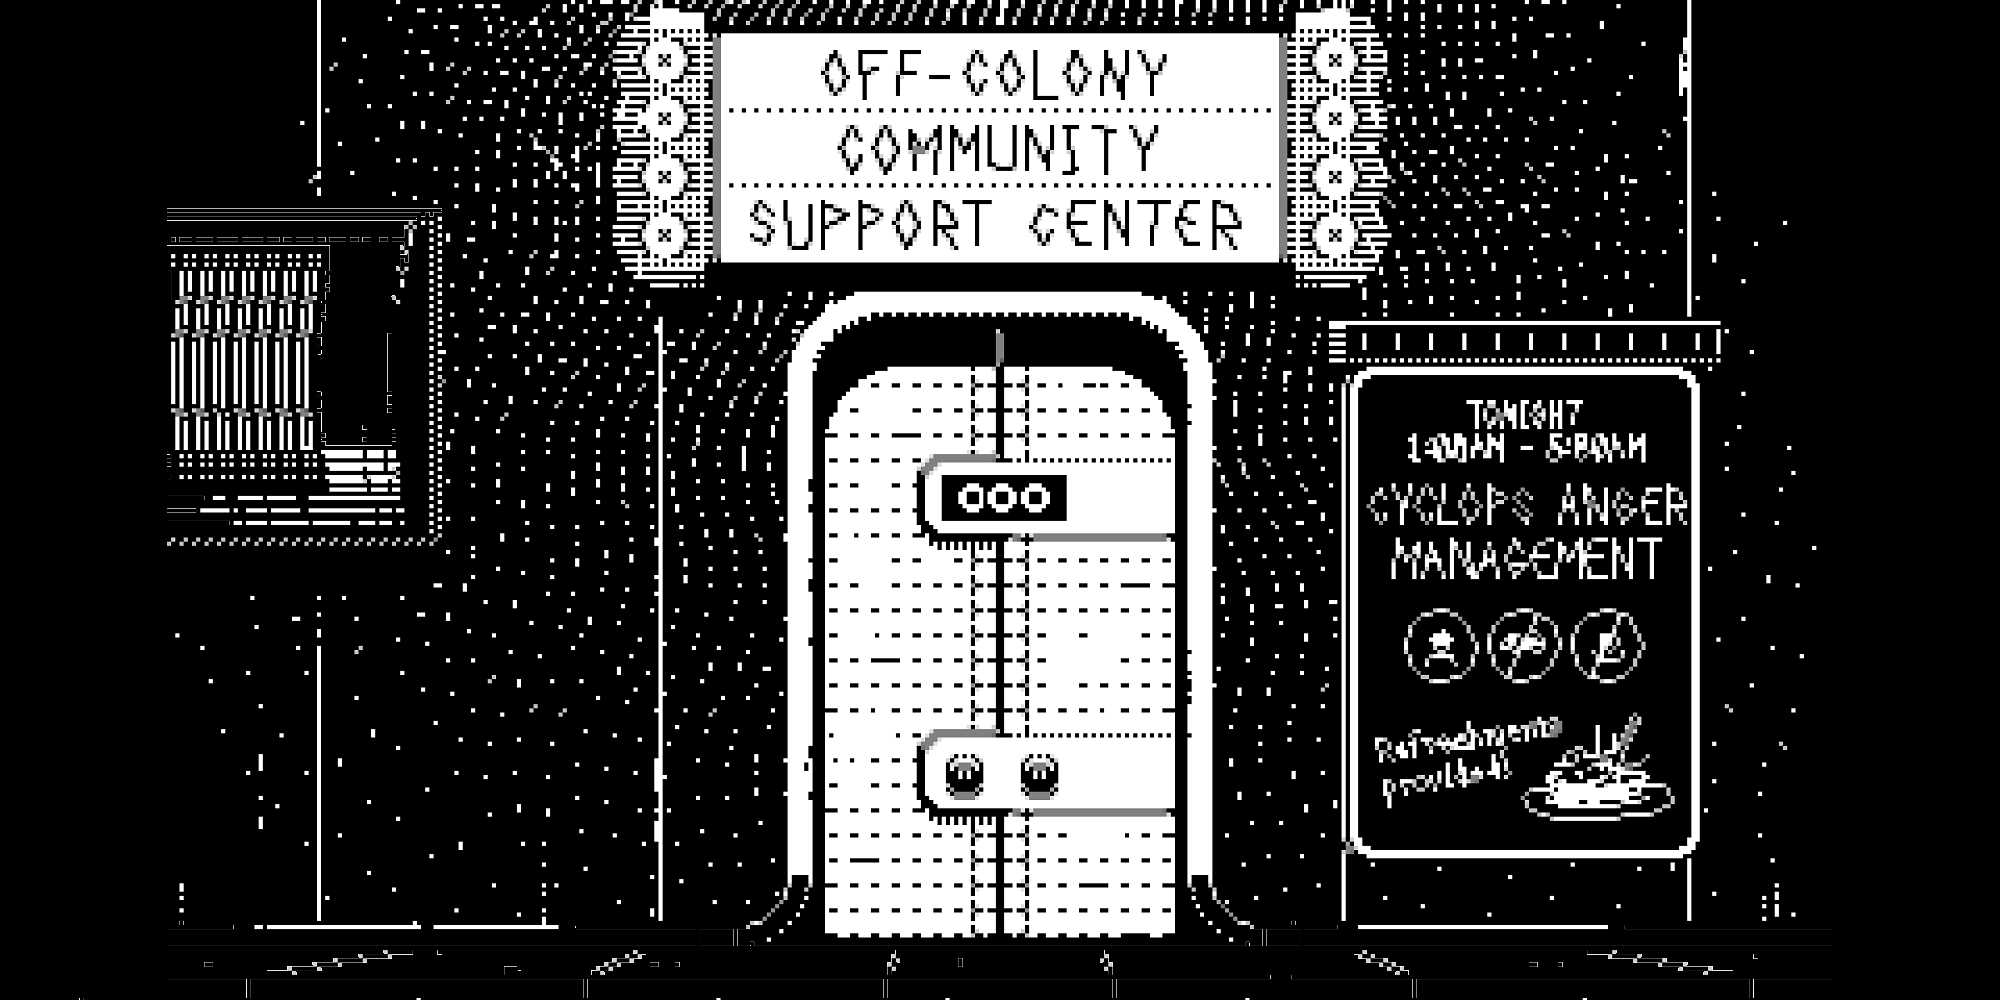 the off-colony community support center in mars after midnight